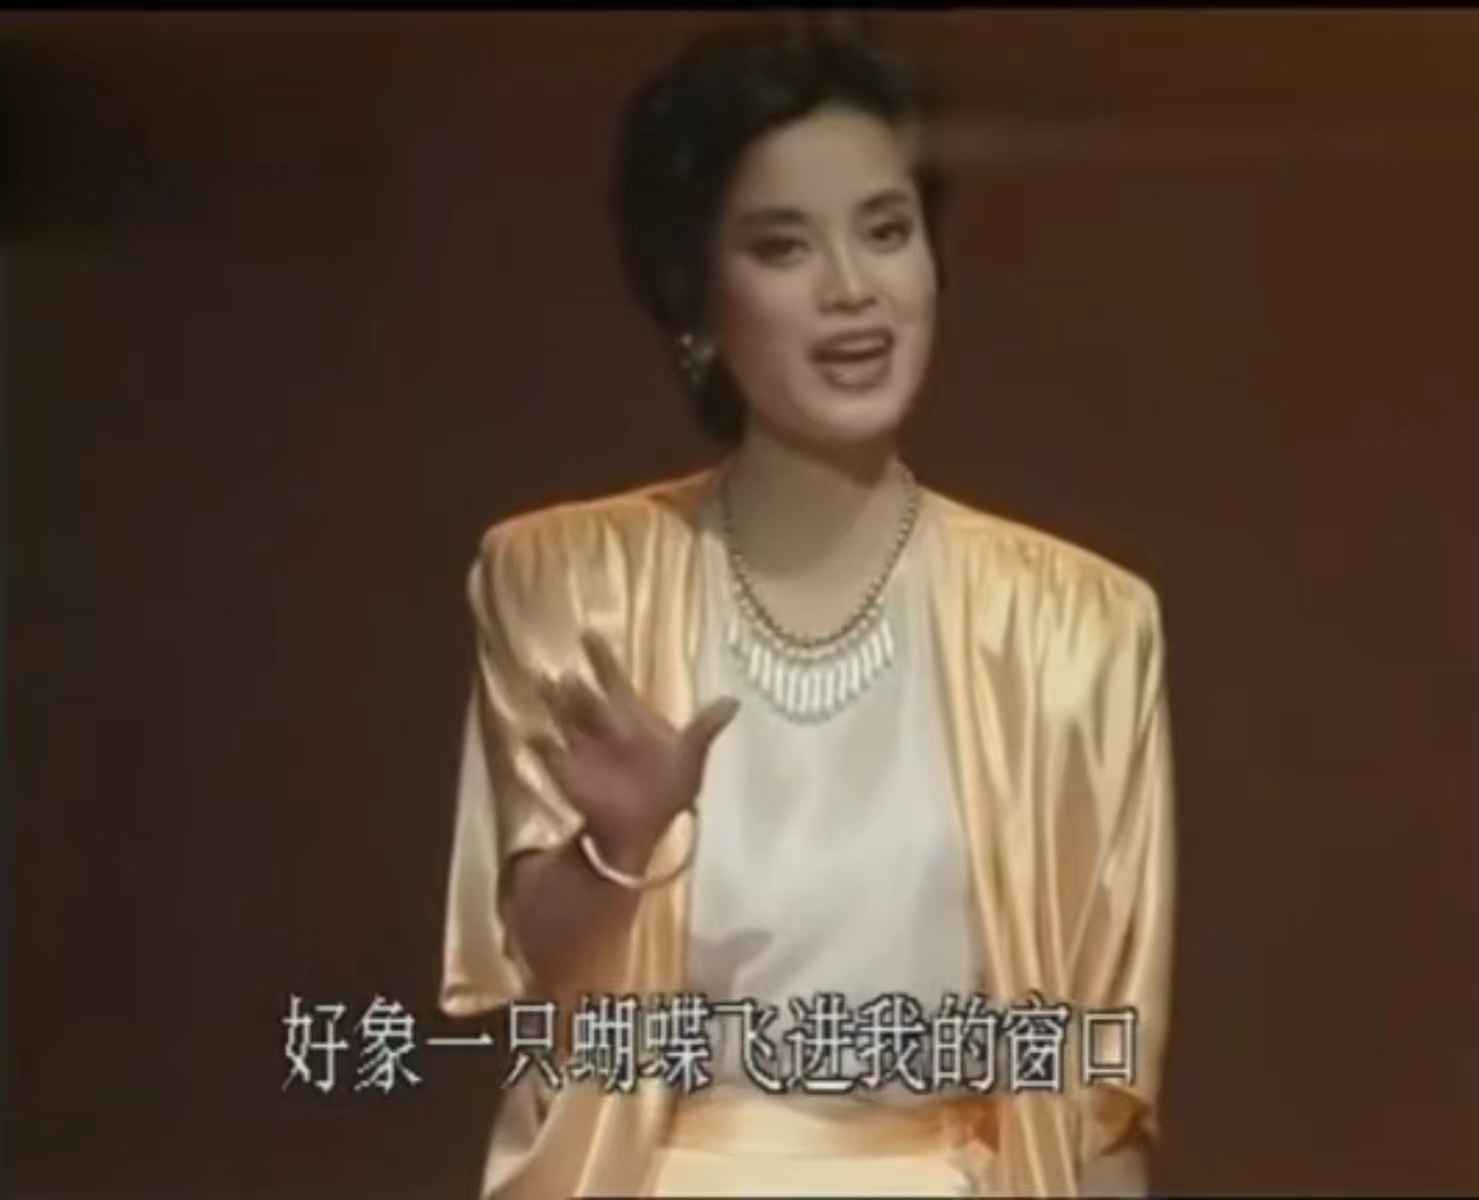 Mao Amin sings "Missing" at the Spring Festival Gala